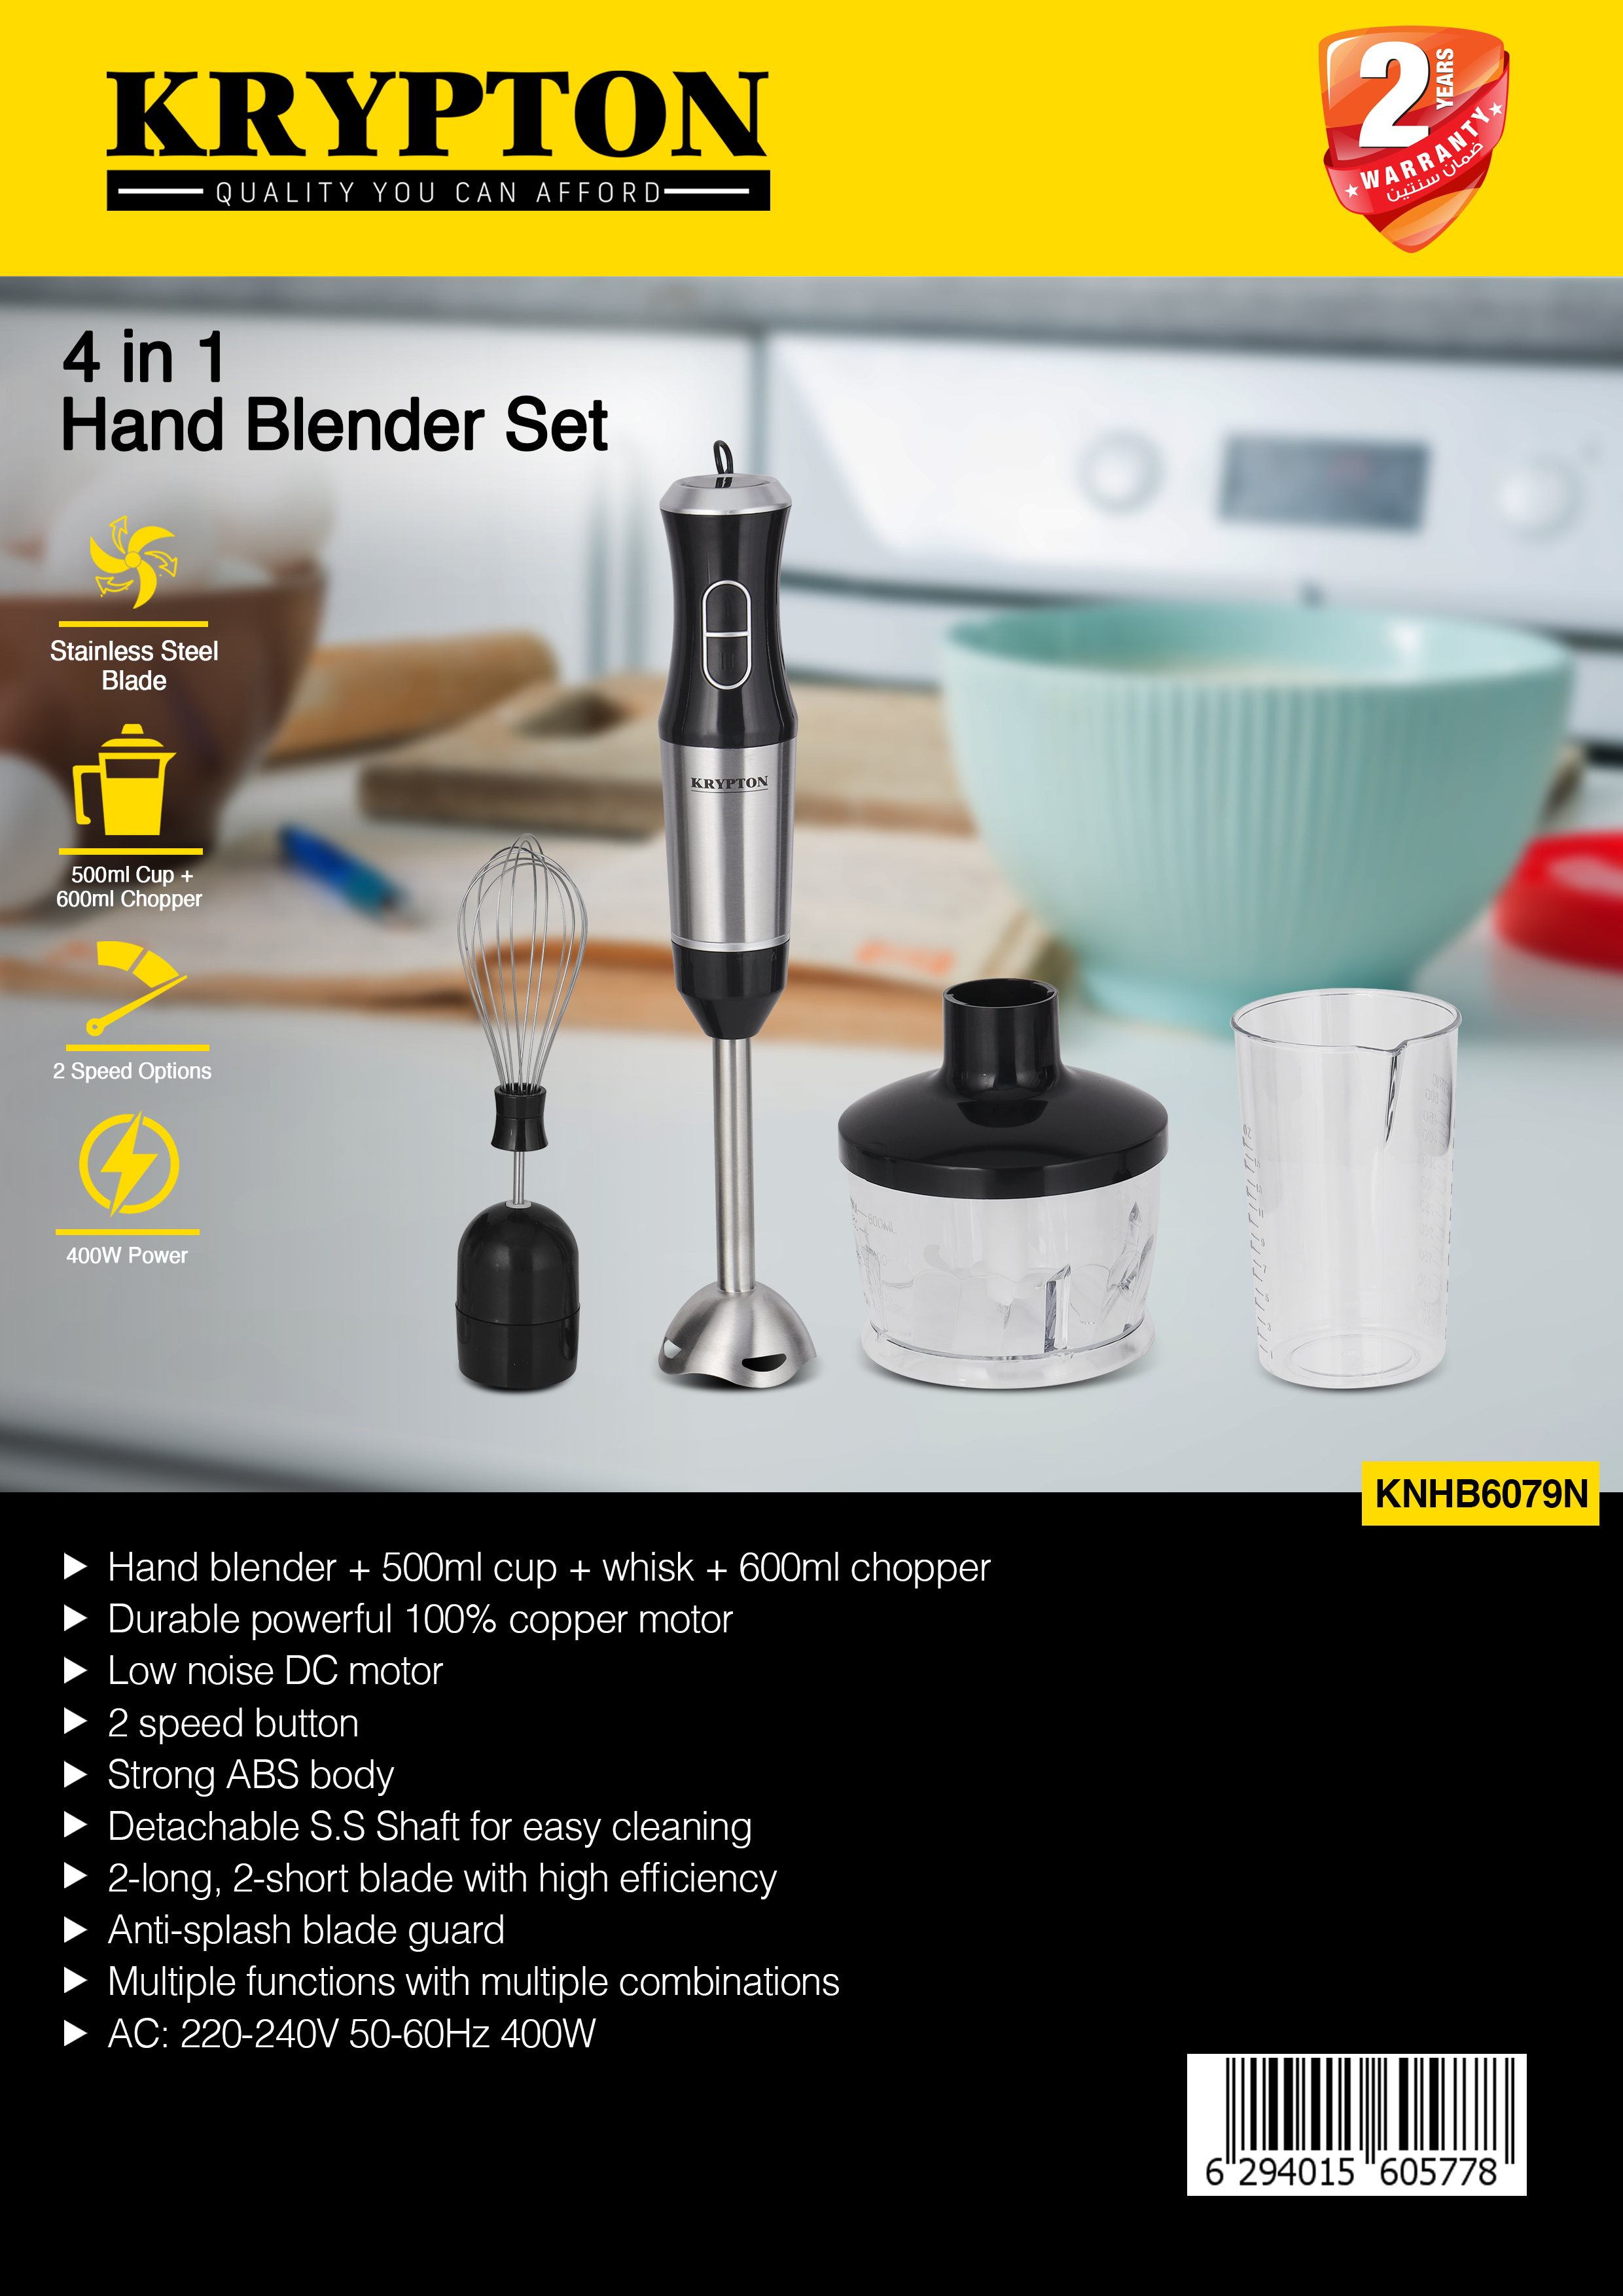 New House Kitchen Immersion Hand Blender 2 Speed Stick Mixer with Stainless Steel Shaft & Blade, 300 Watts Easily Food, Mixes Sauces, Purees Soups